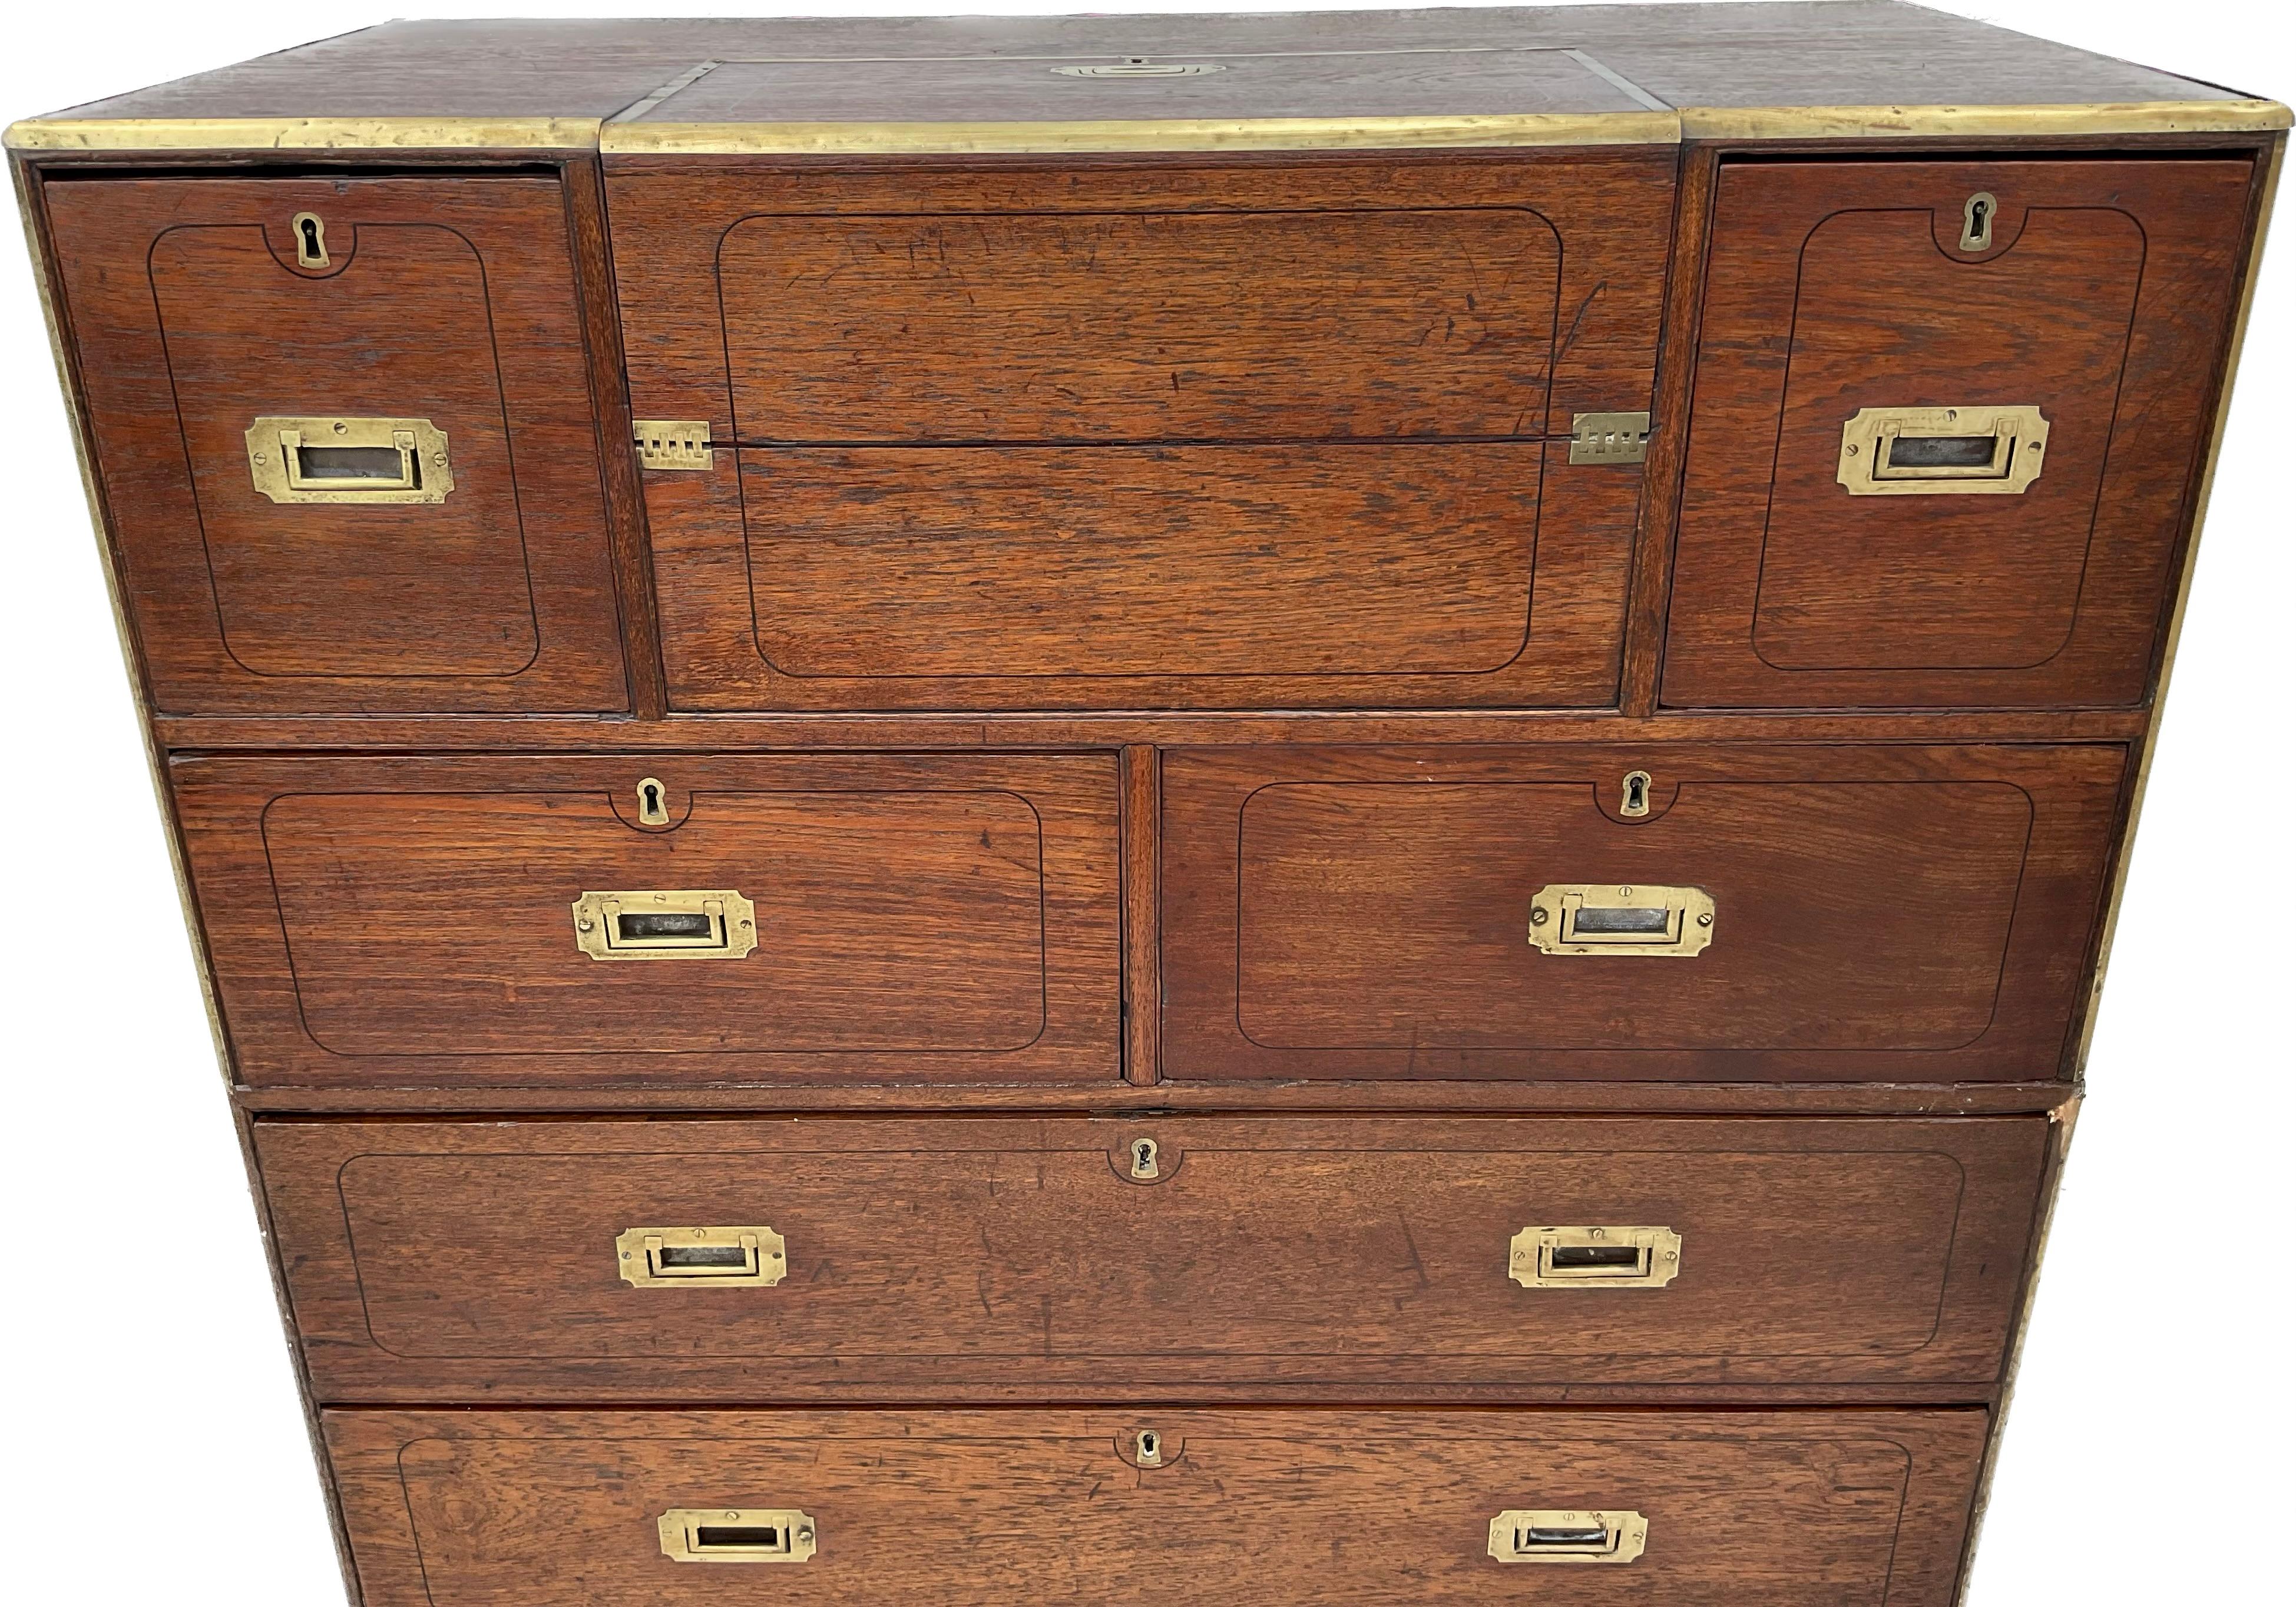 19th Century English Campaign Chest With Integrated Writing Desk For Sale